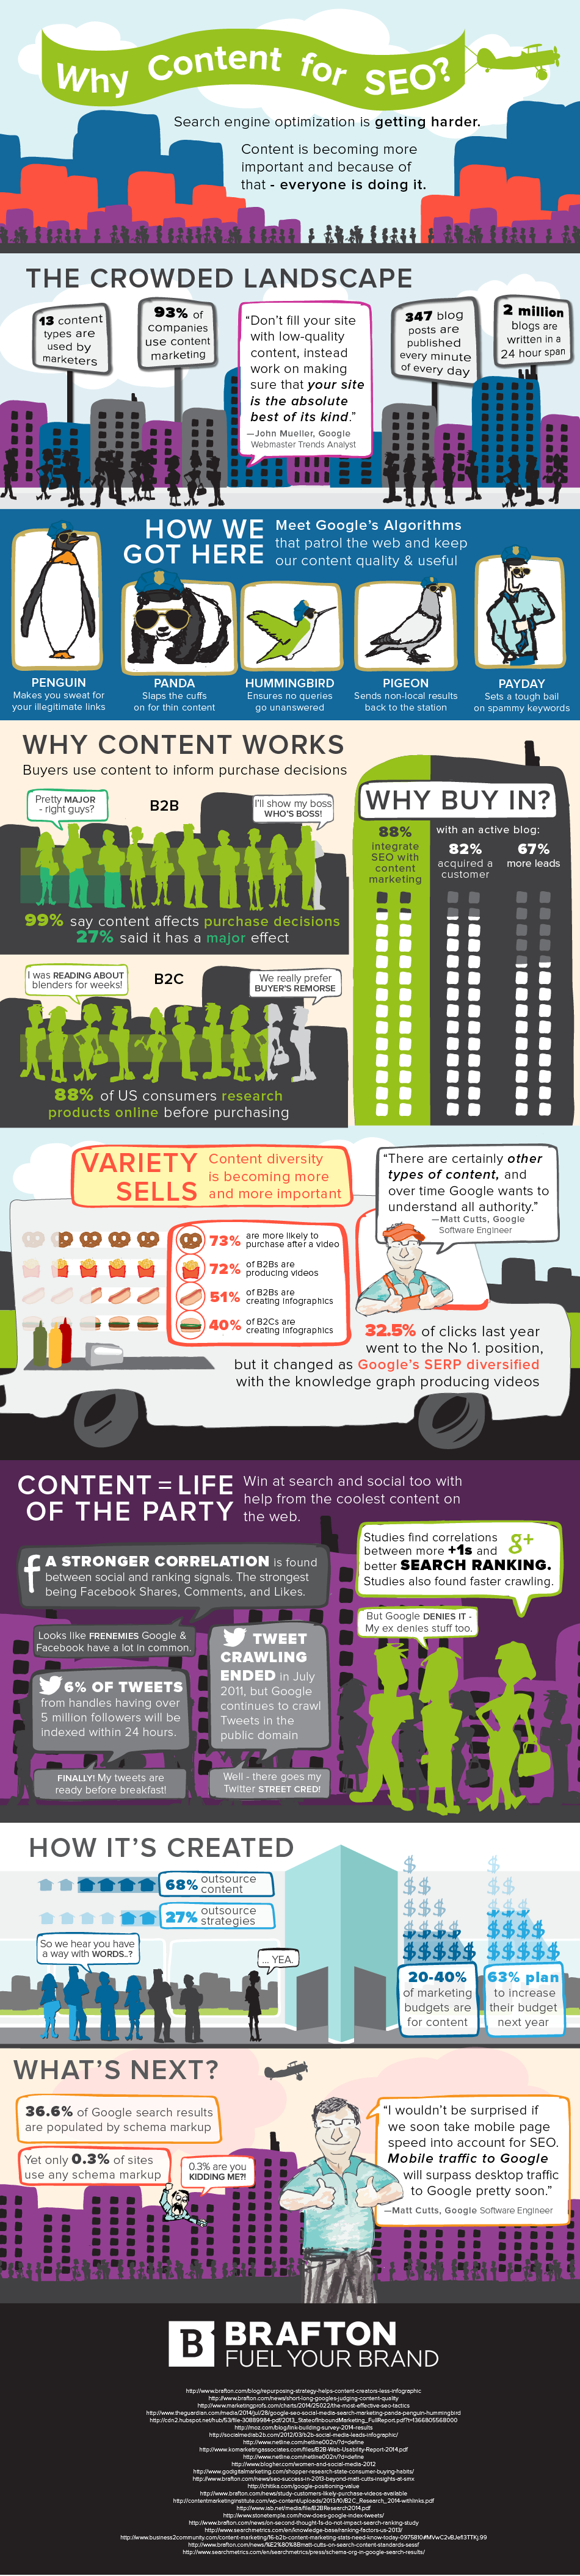 Brafton's Infographic: Why content for SEO (2015)